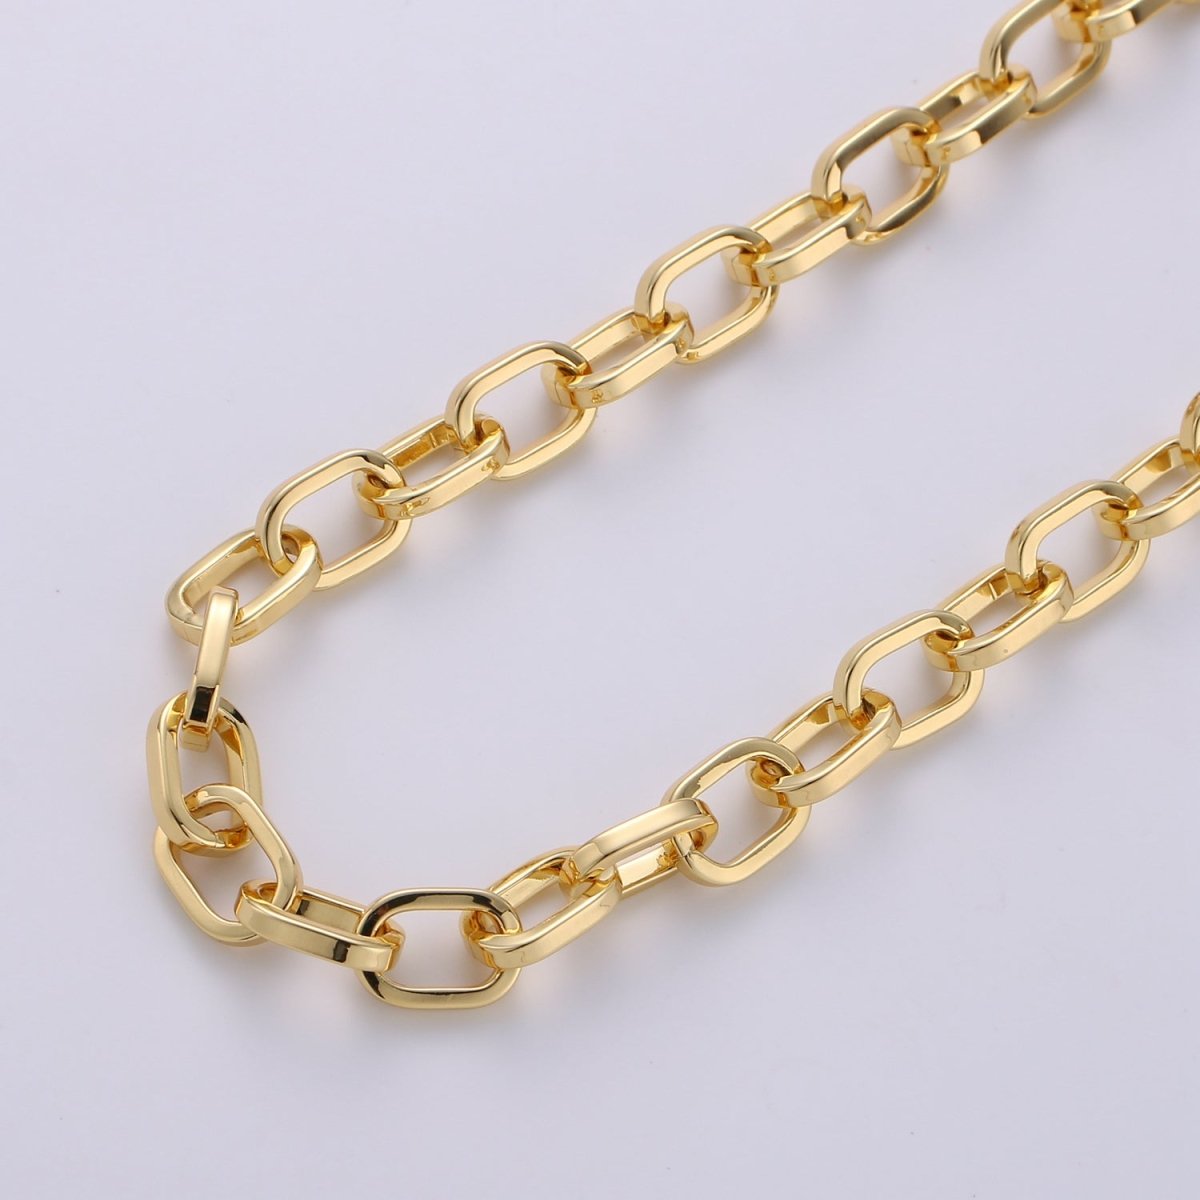 Wholesale Brass Round Oval Paperclip Chain Necklace Making - Pandahall.com